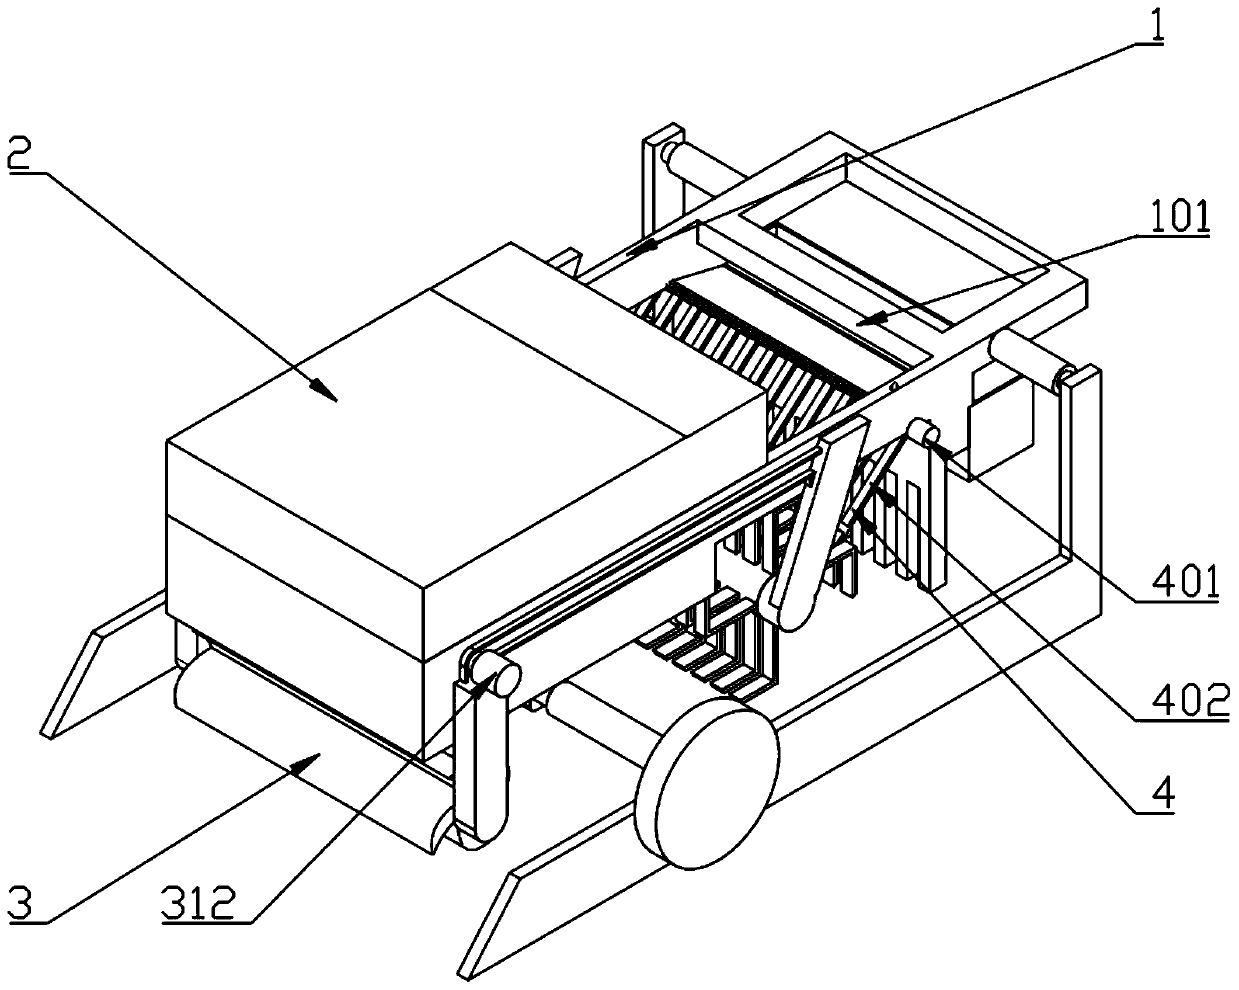 Agricultural soil plowing and repairing device